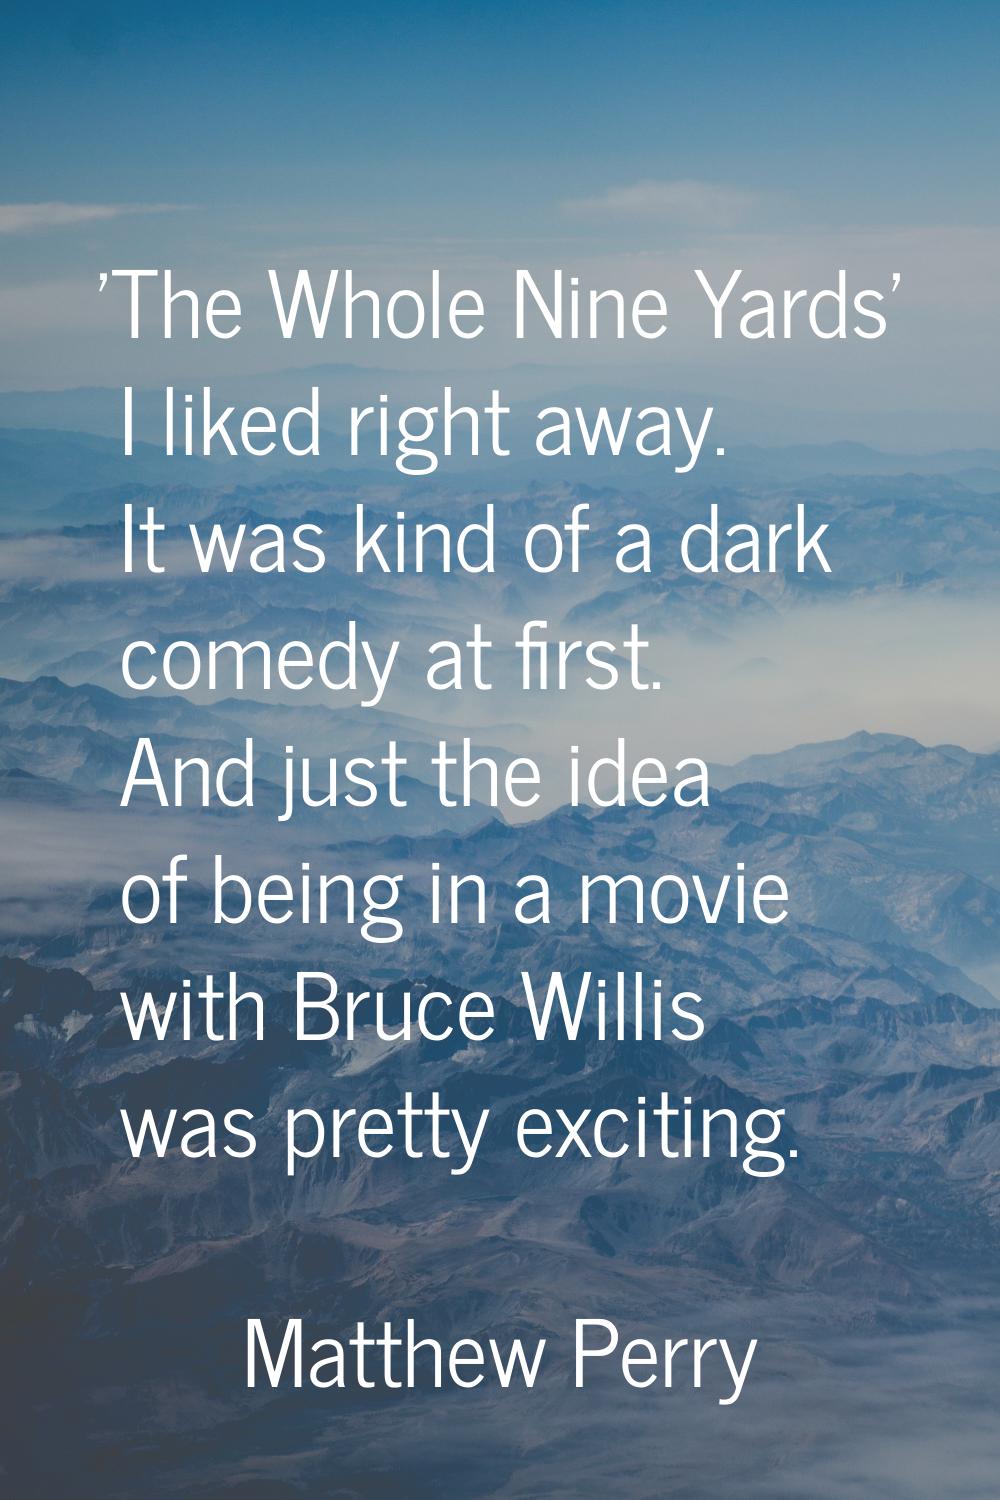 'The Whole Nine Yards' I liked right away. It was kind of a dark comedy at first. And just the idea